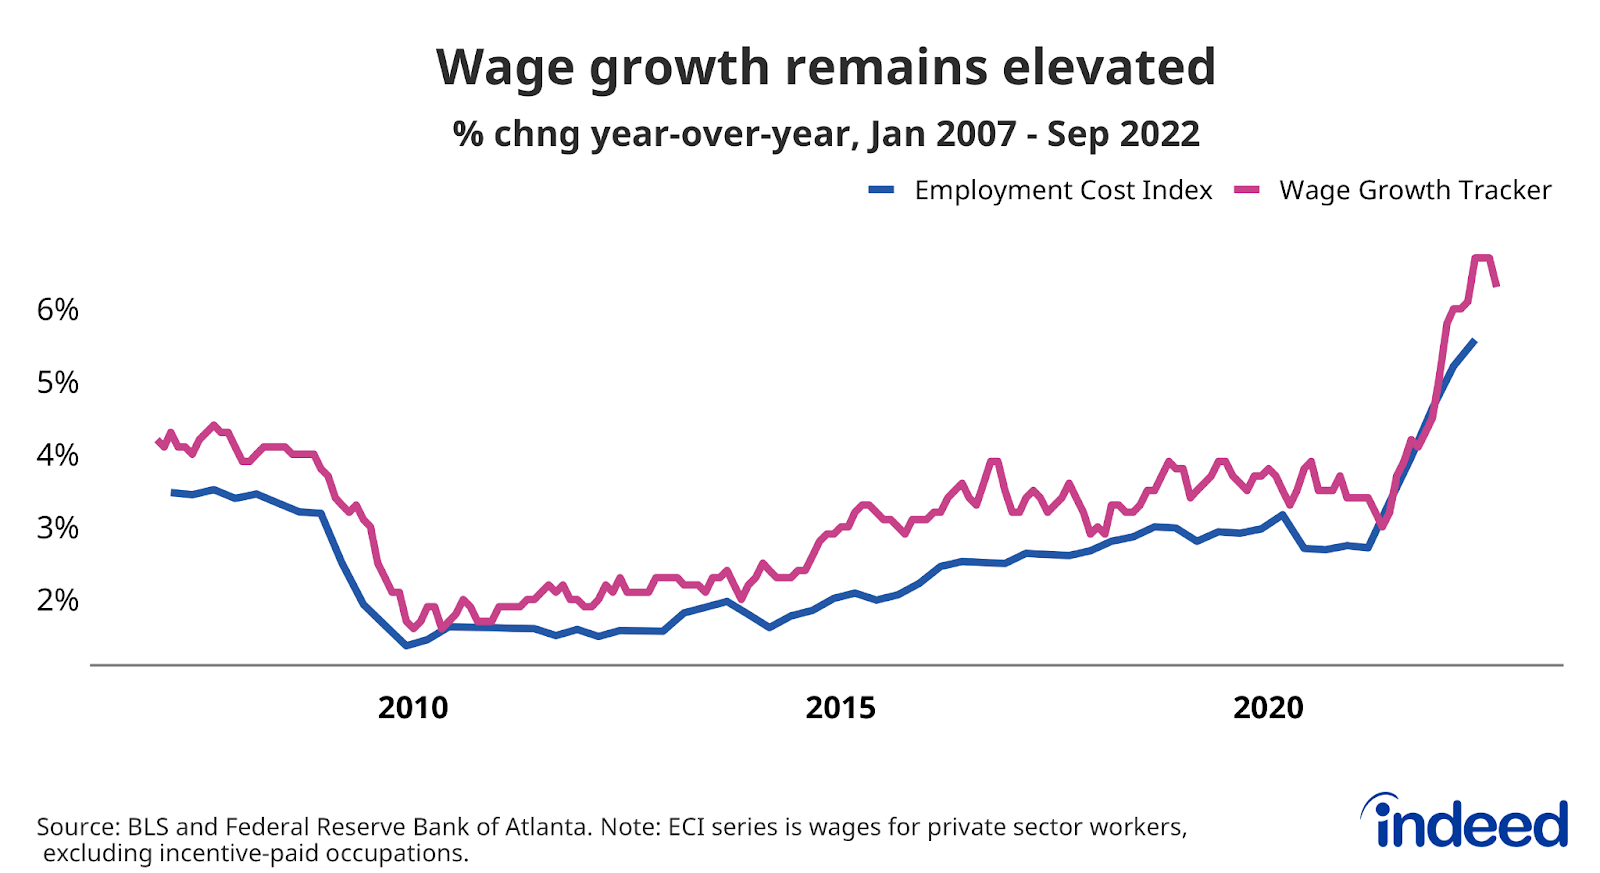 Line graph titled “Wage growth remains elevated” with a vertical axis ranging from 2% to 6% and a horizontal axis that covers January 2007 to September 2022.